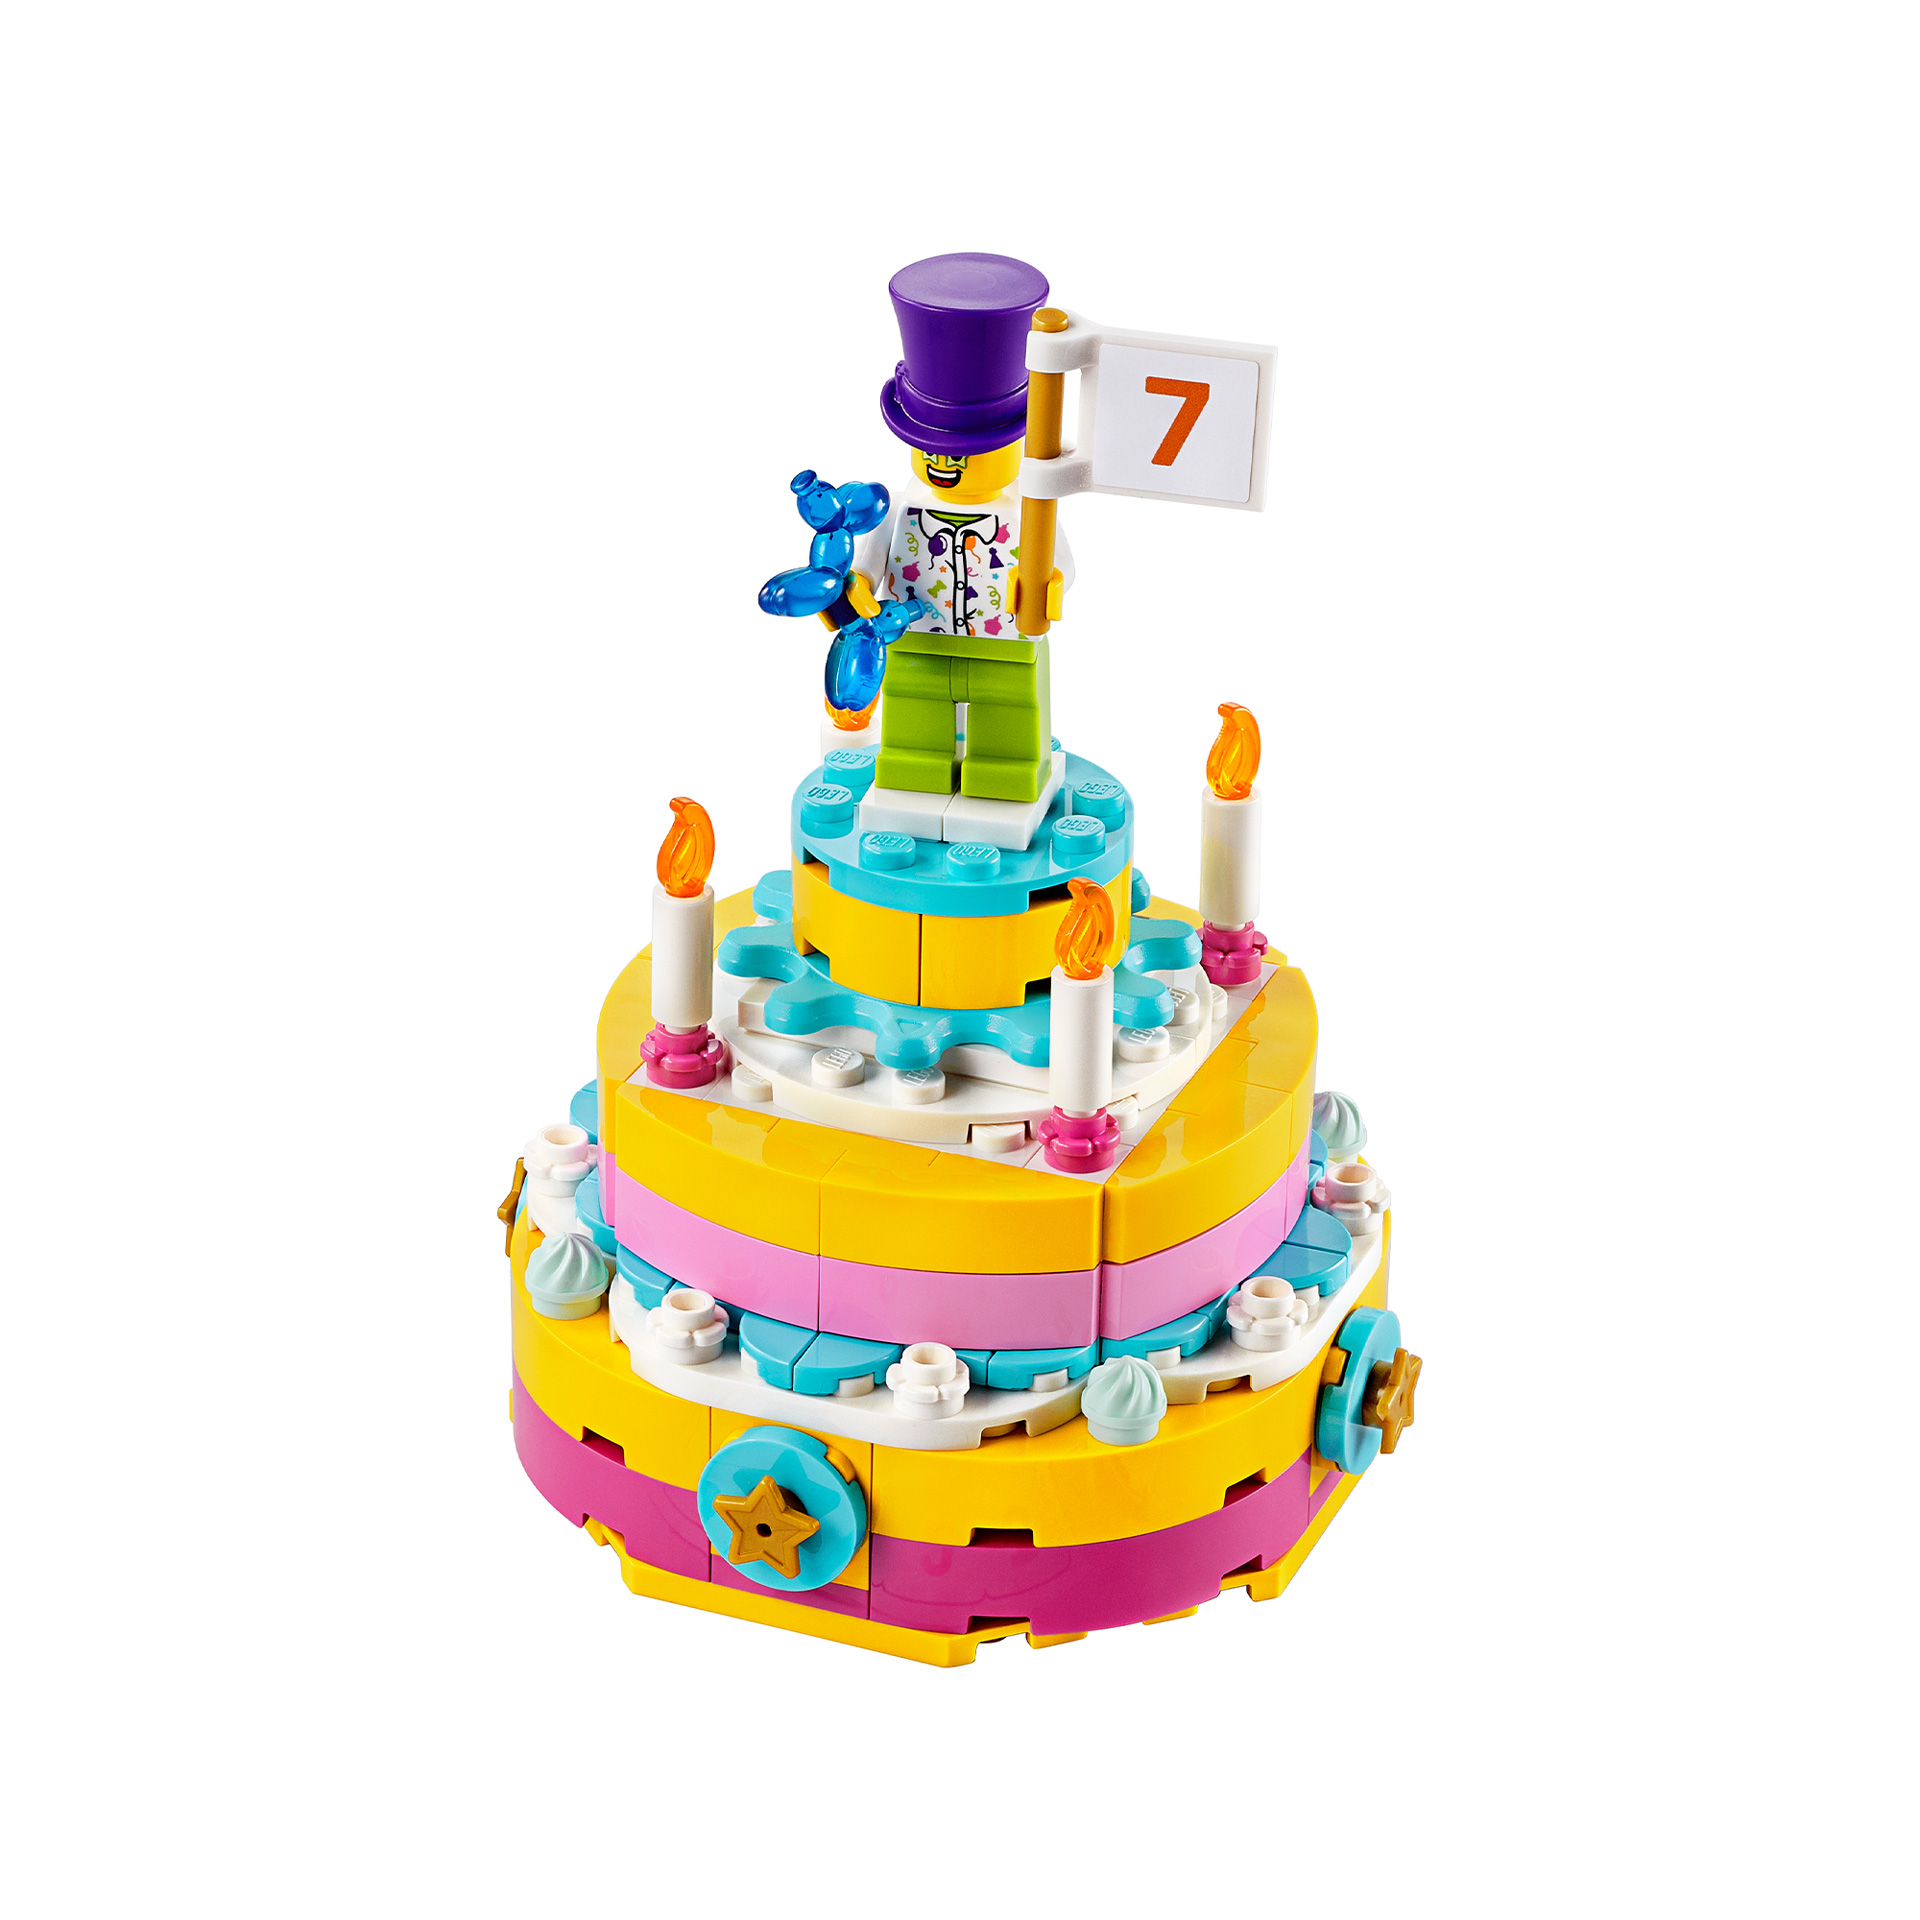 Set Compleanno 40382, , large